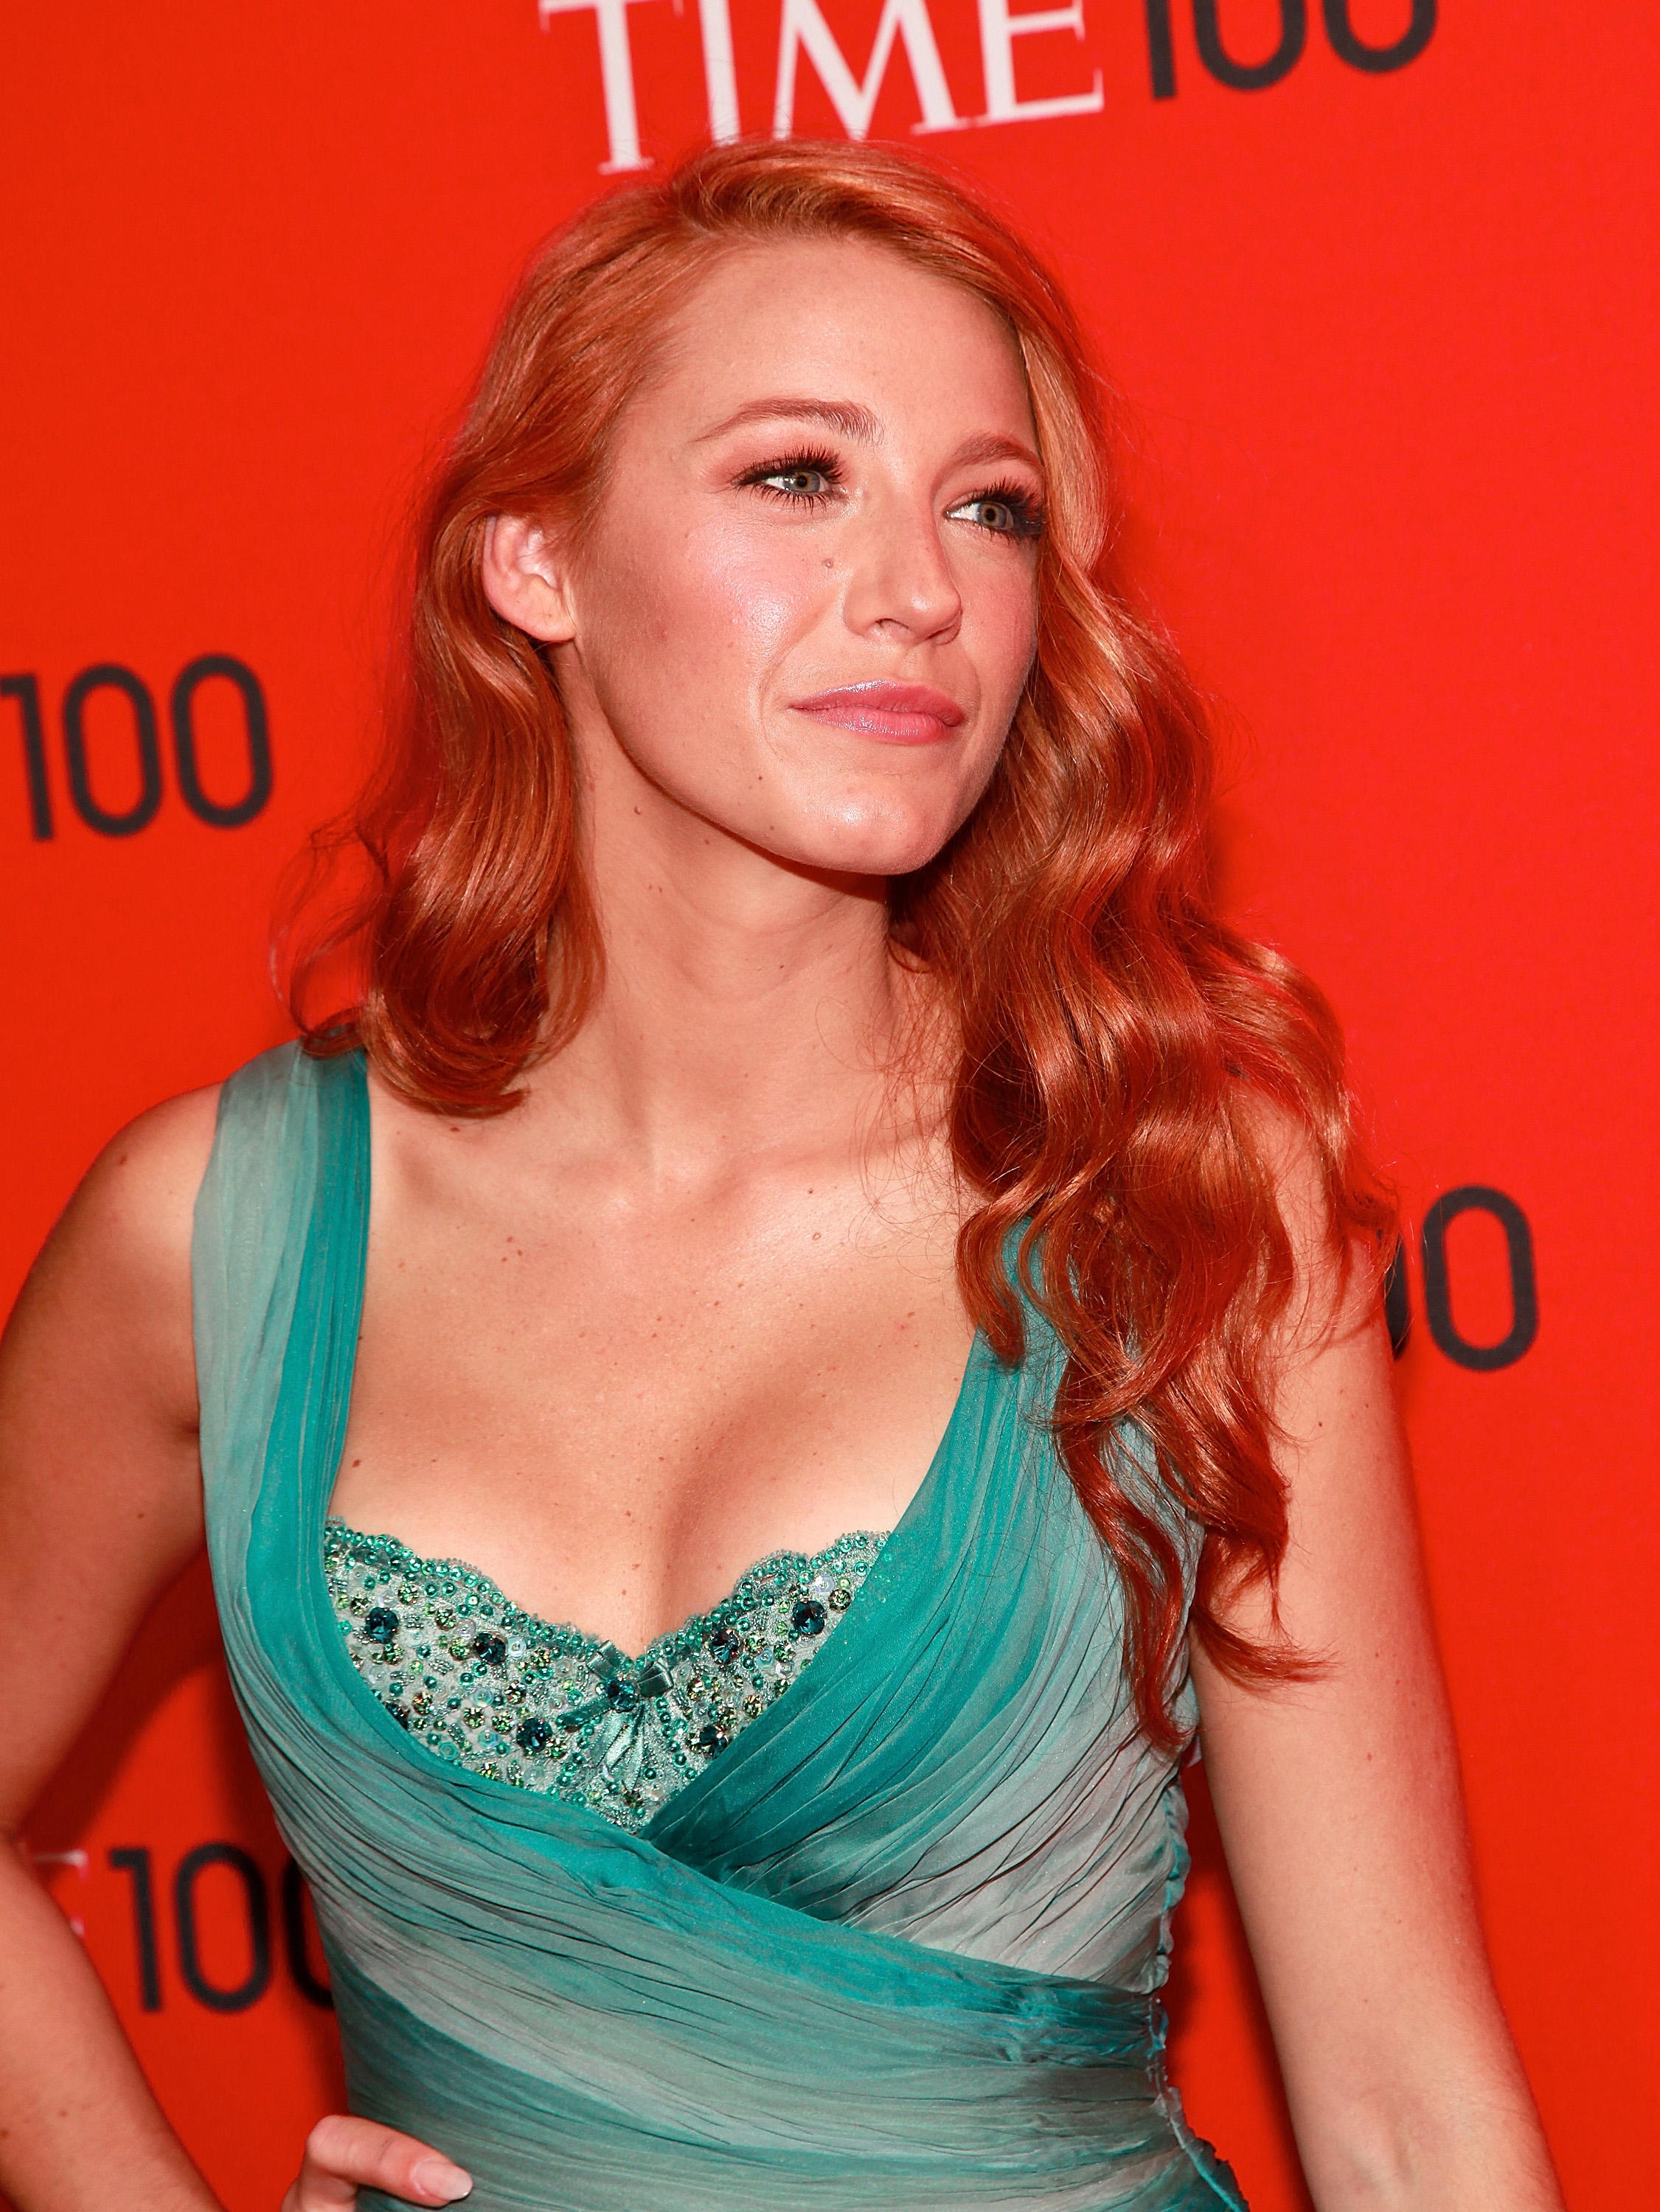 Blake Lively at the TIME 100 gala on April 26, 2011, in New York. | Source: Getty Images